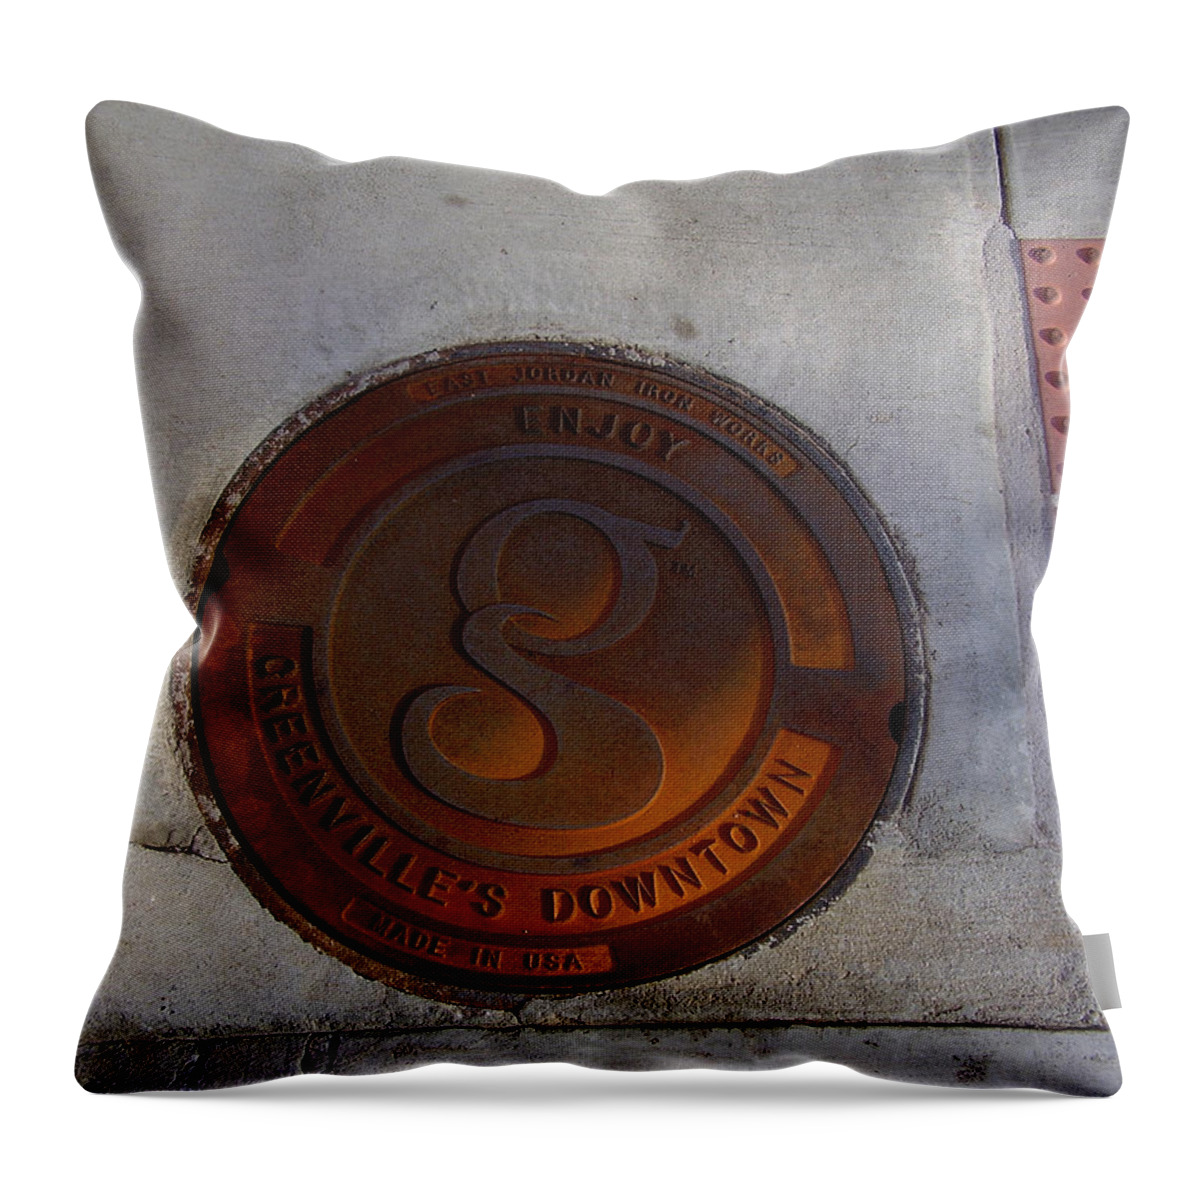 Manhole Throw Pillow featuring the photograph Manhole I by Flavia Westerwelle